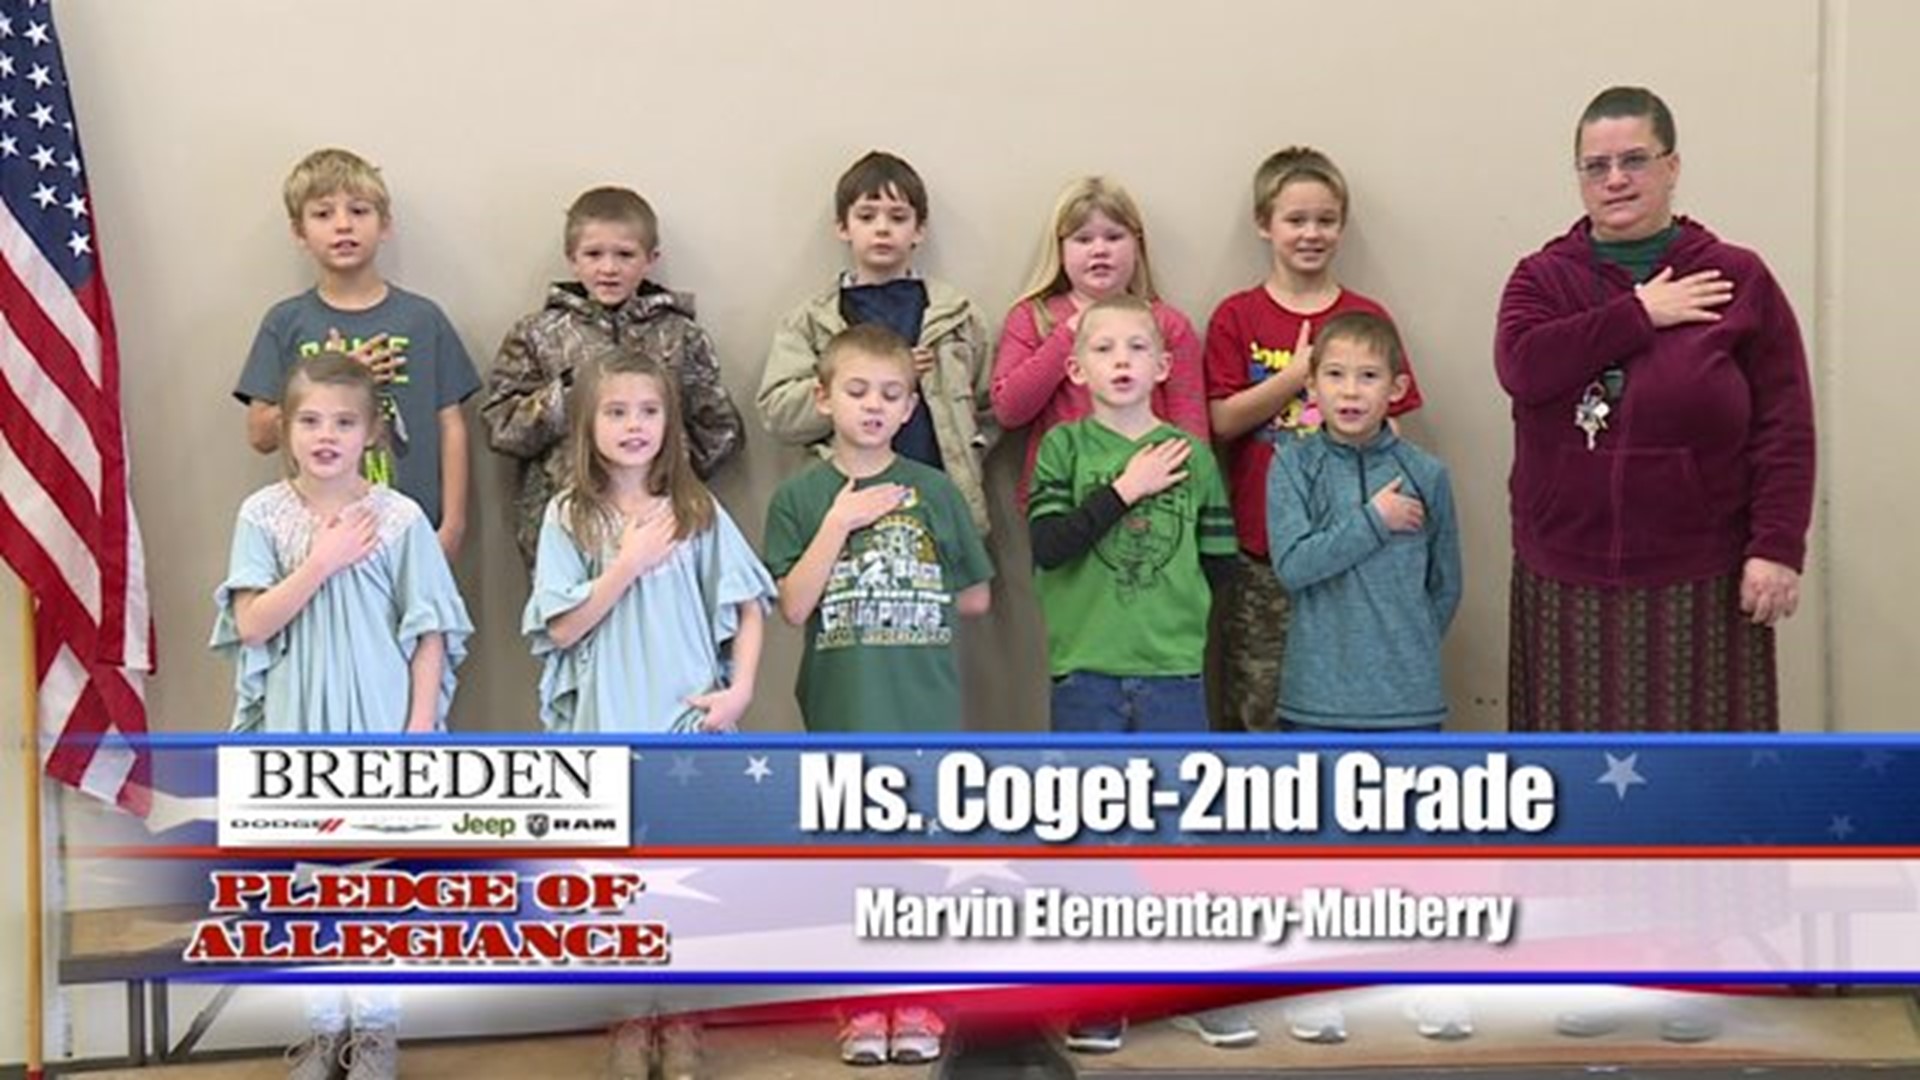 Marvin Elementary, Mulberry - Ms. Coget - 2nd Grade